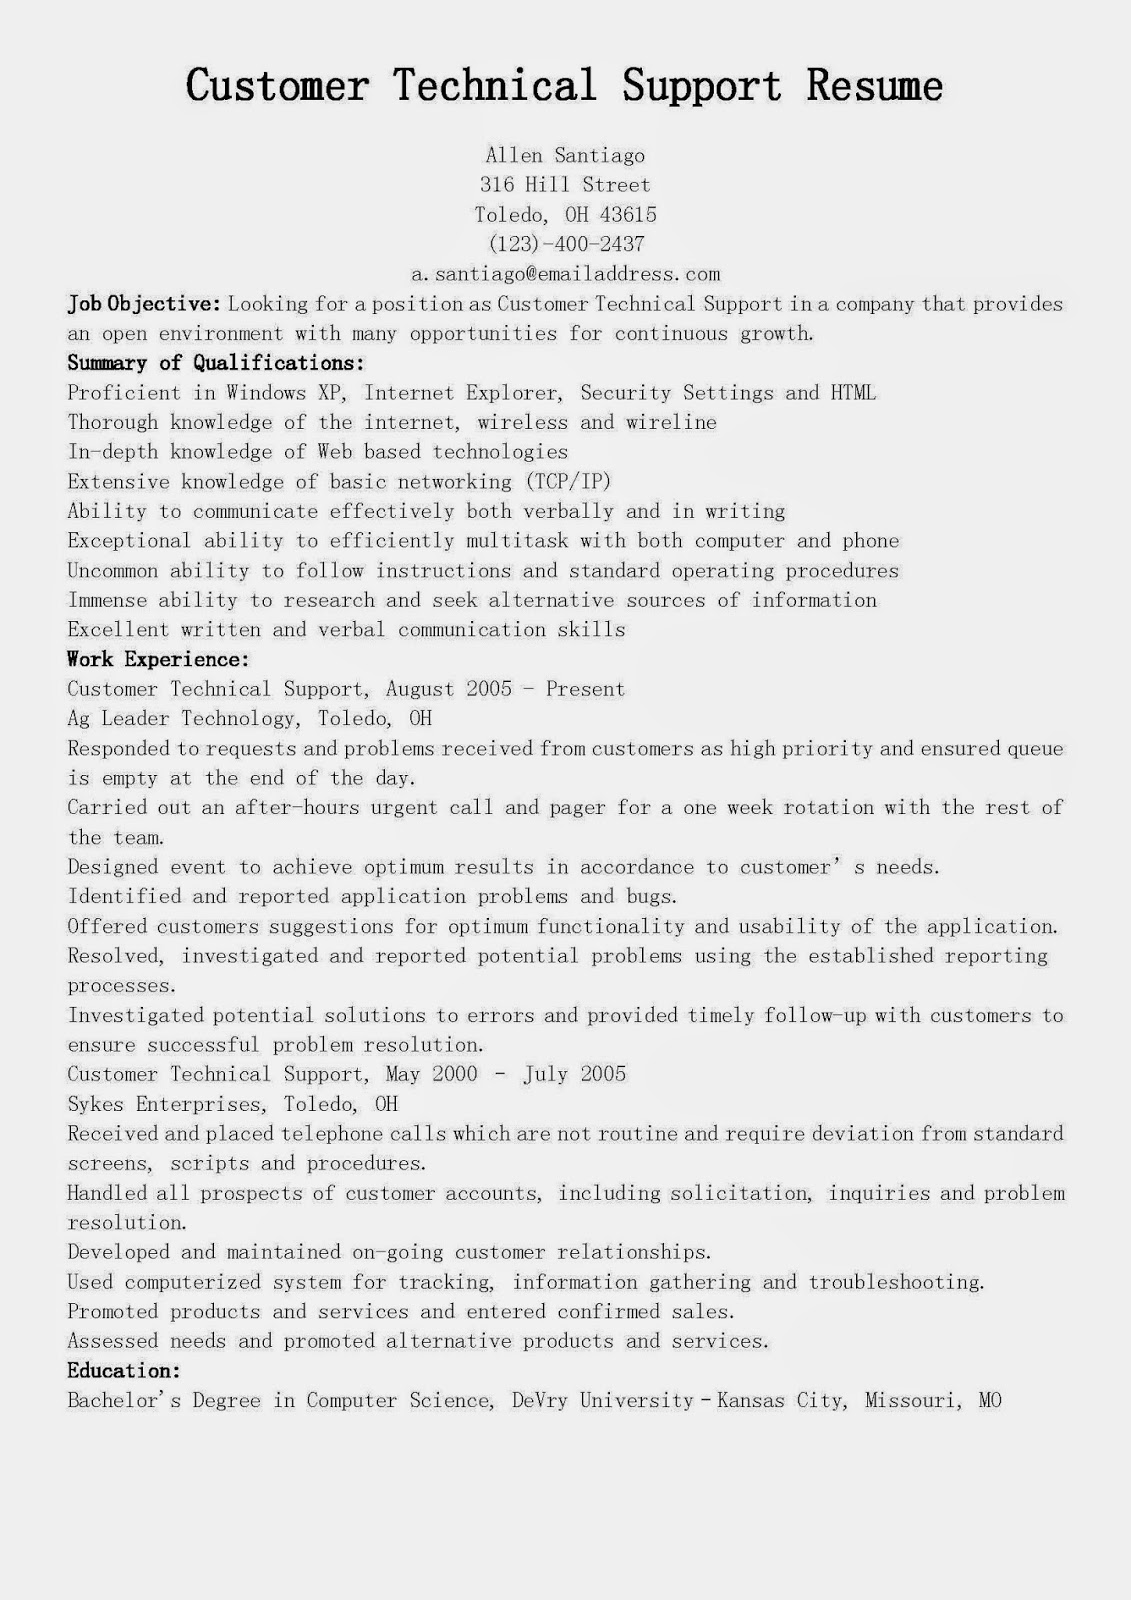 Sample resume for call center technical support